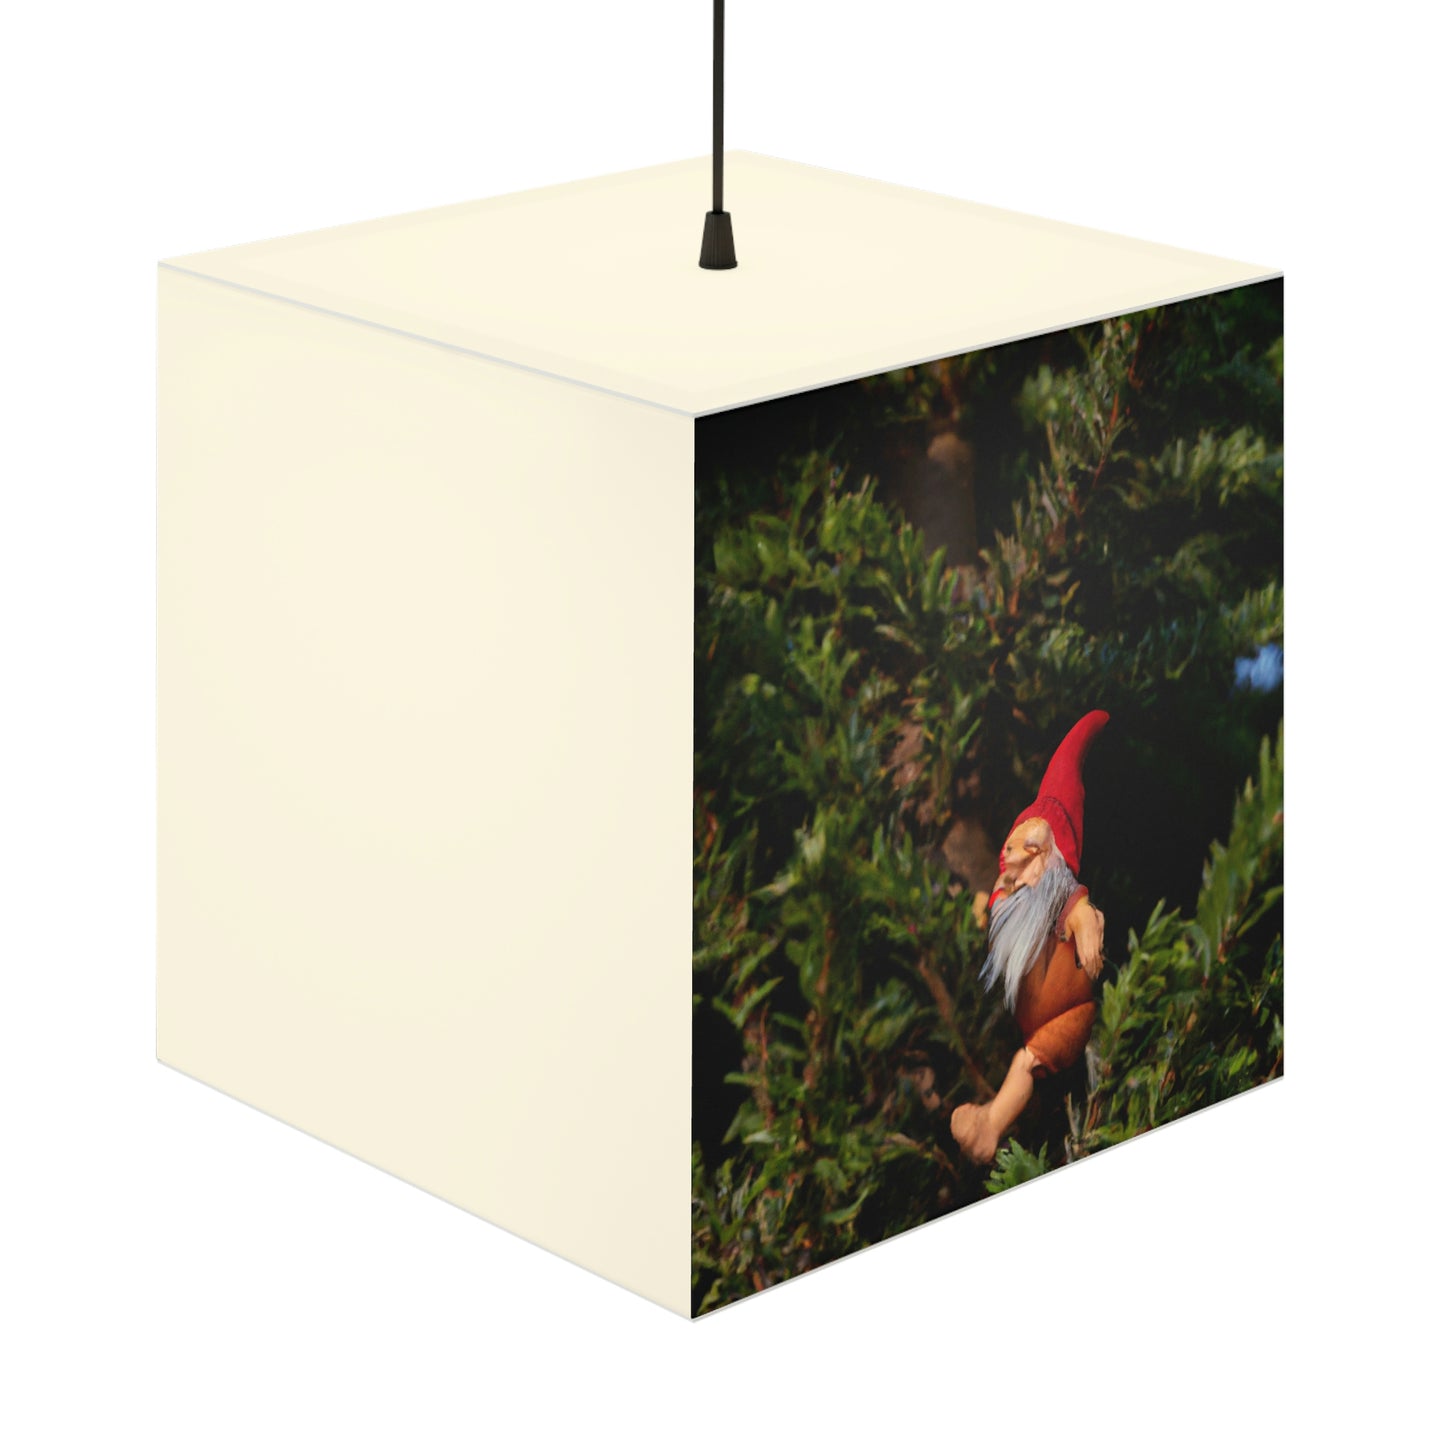 The Gnome's High-Rise Adventure - The Alien Light Cube Lamp